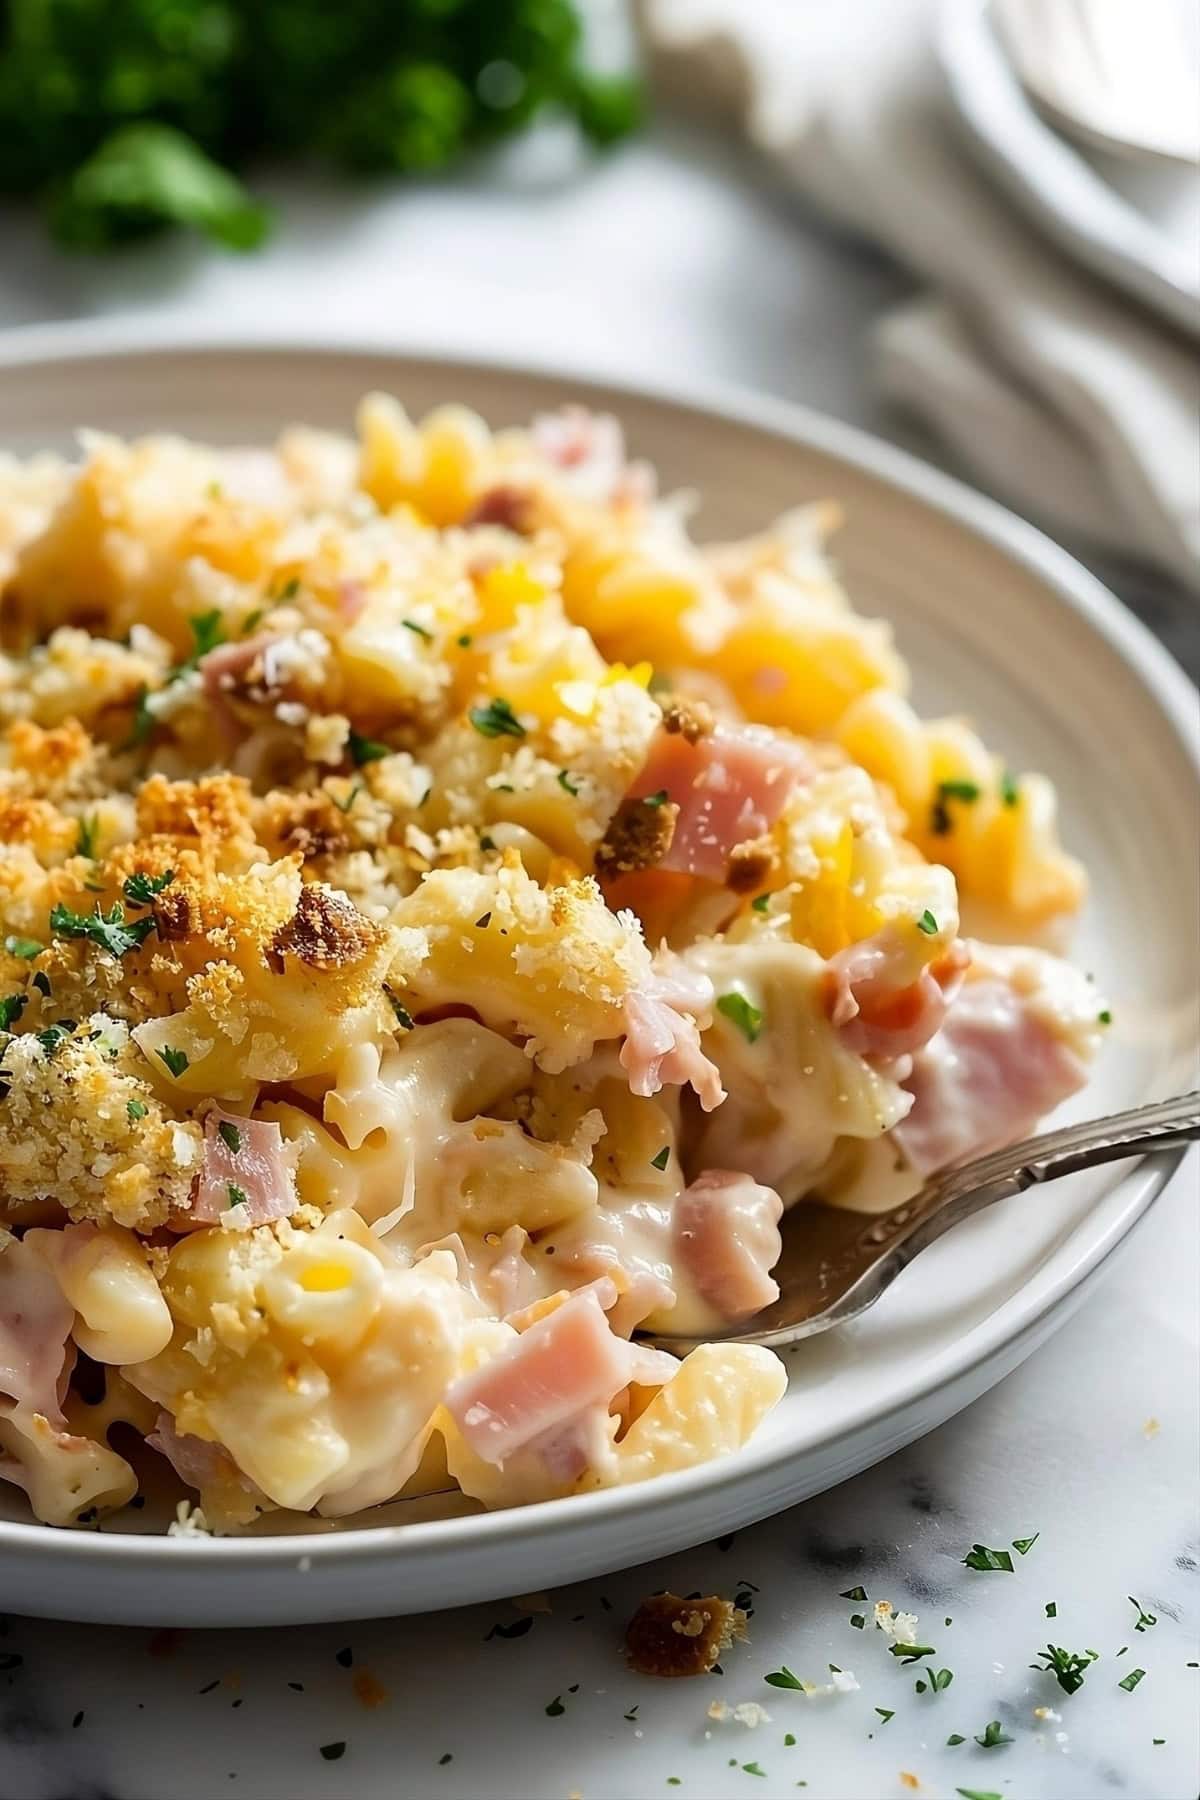 Cheesy ham and noodle casserole served on a plate.